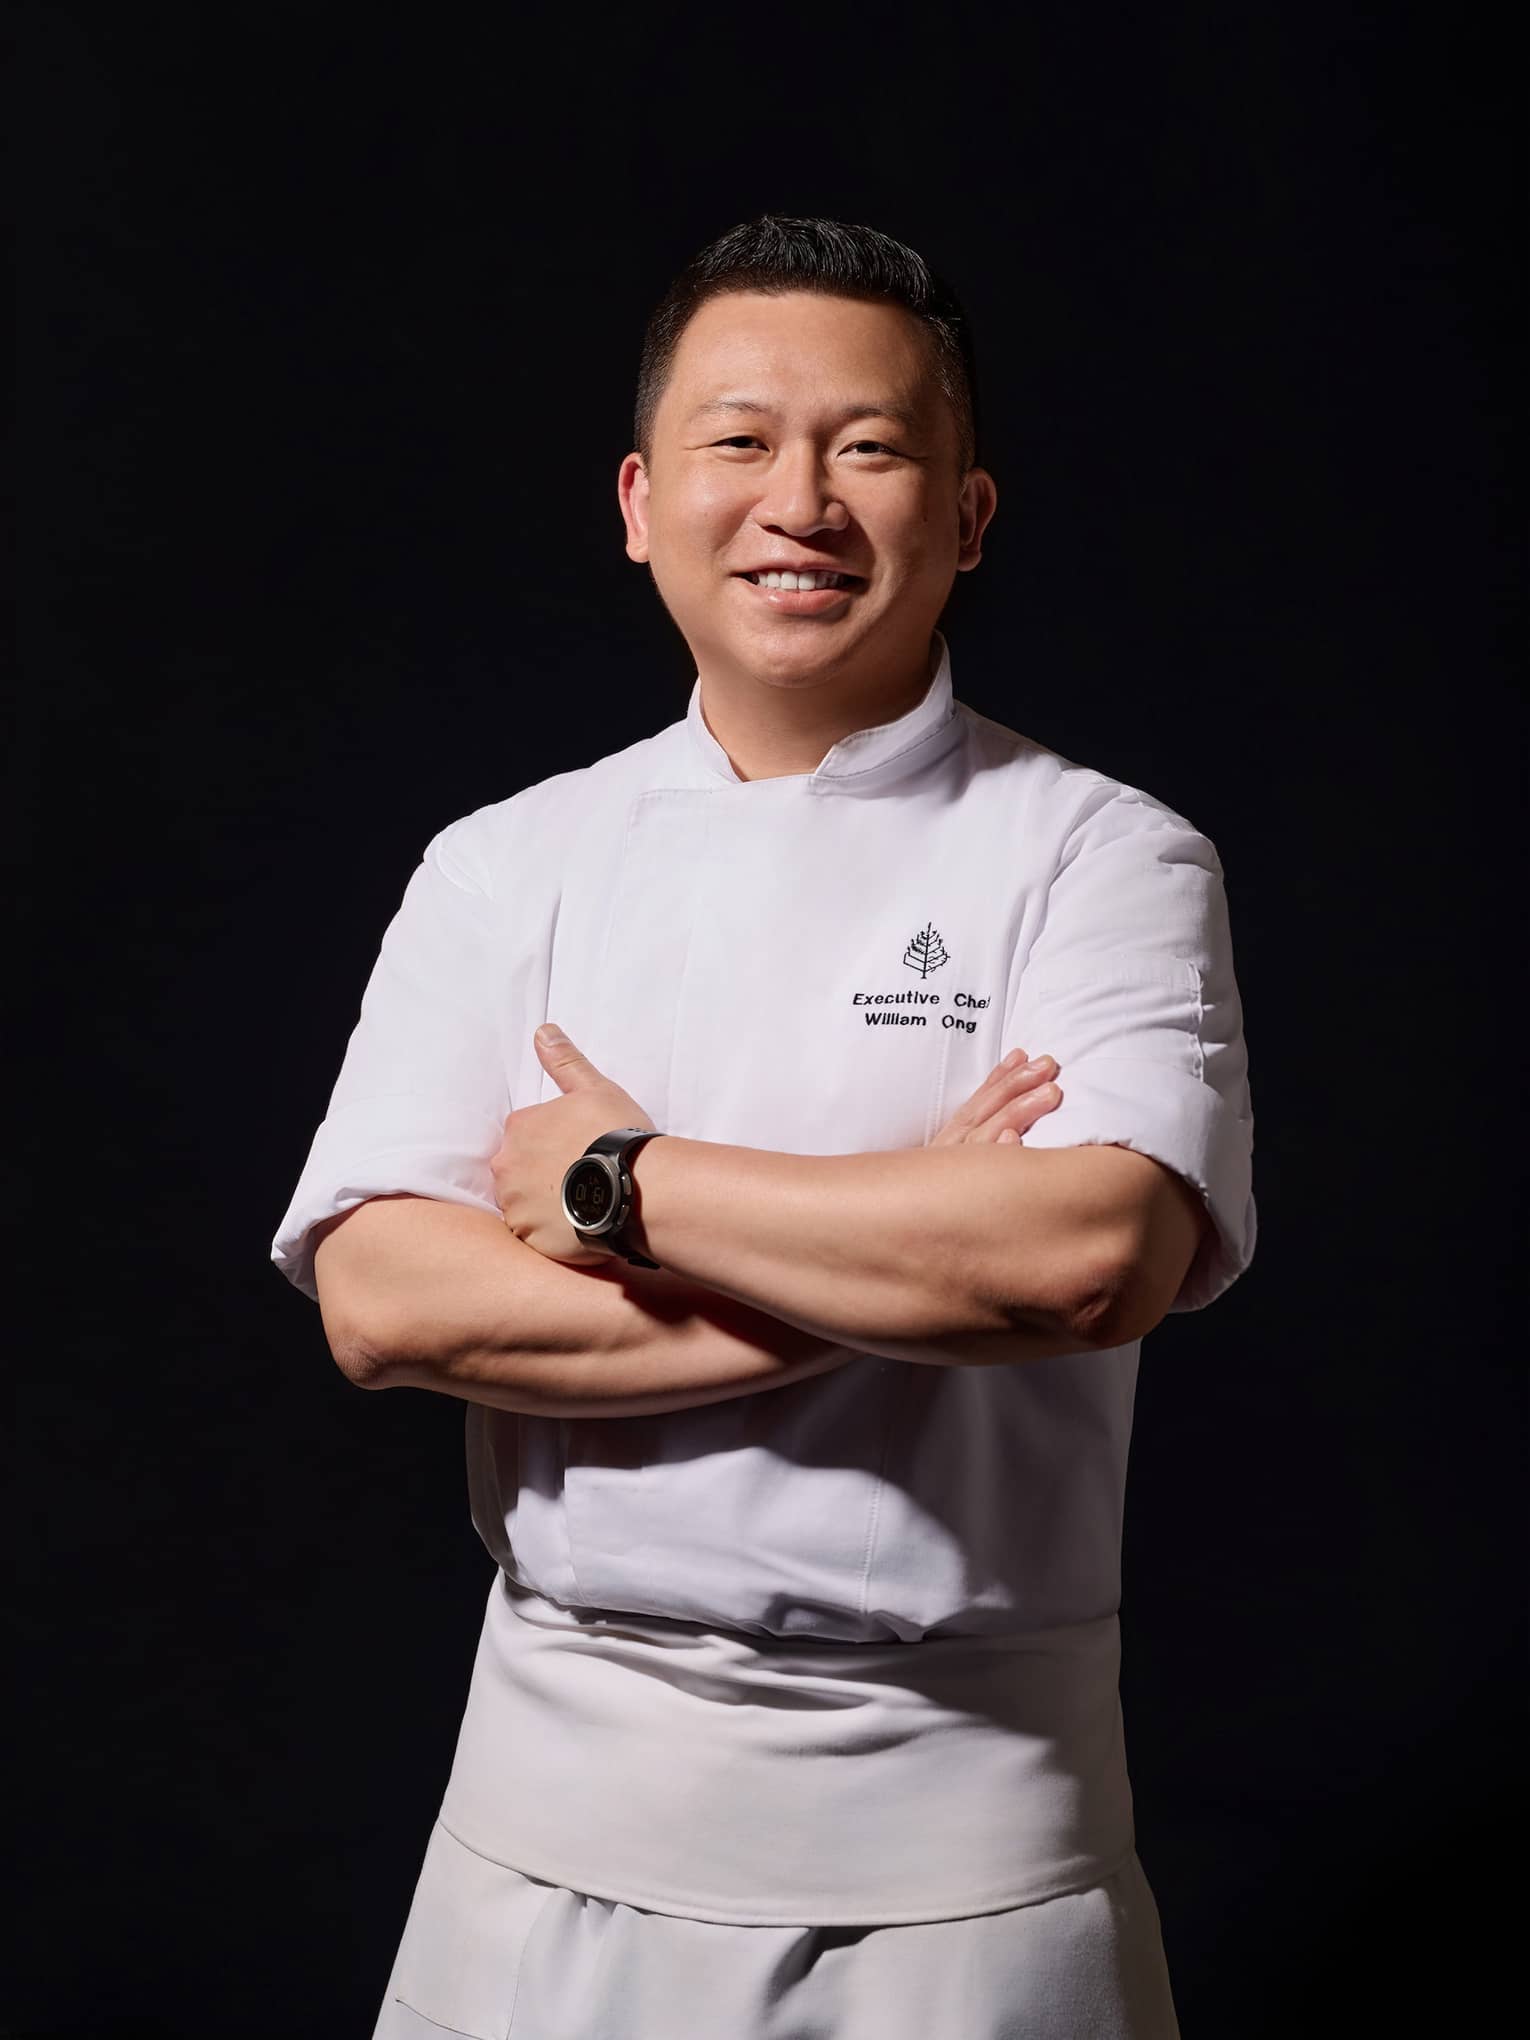 Smiling chef in chef?s coat with Four Seasons logo stands with arms crossed in front of black background